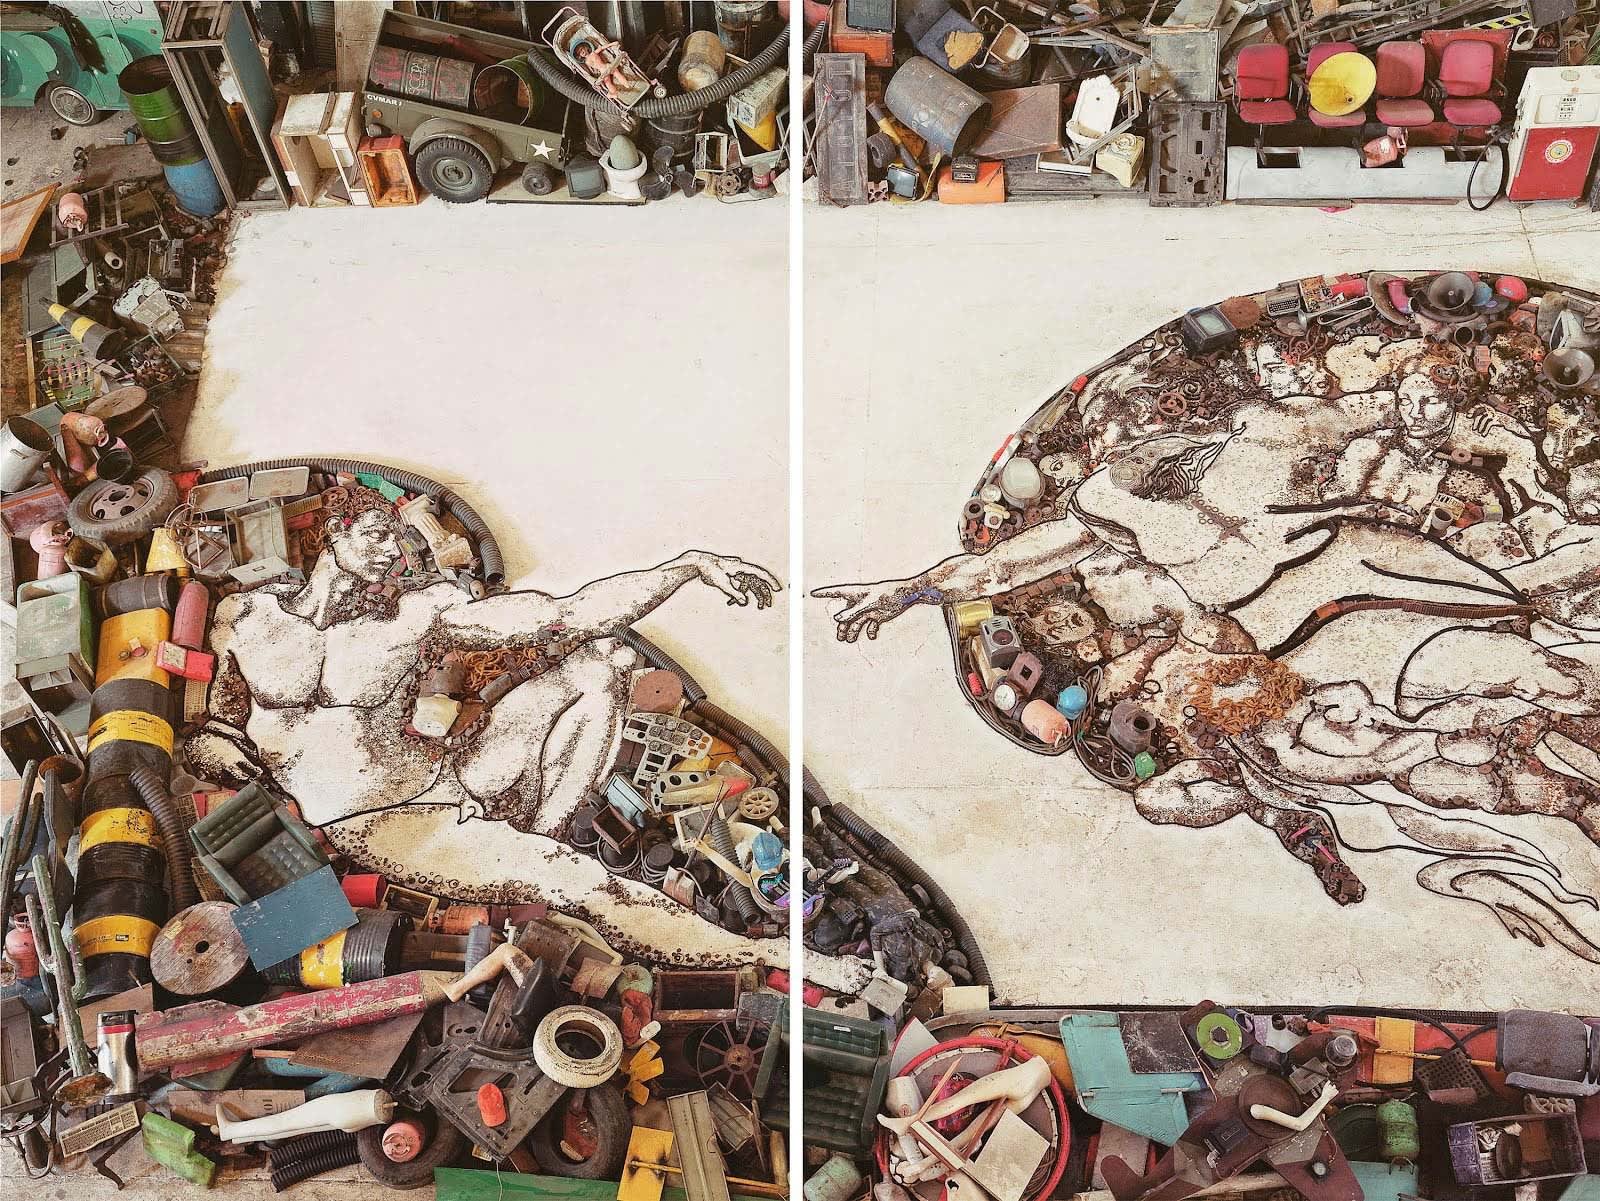 Vik Muniz diptych photographs of Michelangelo's Creation of Adam made with arranged pieces of junk against white background